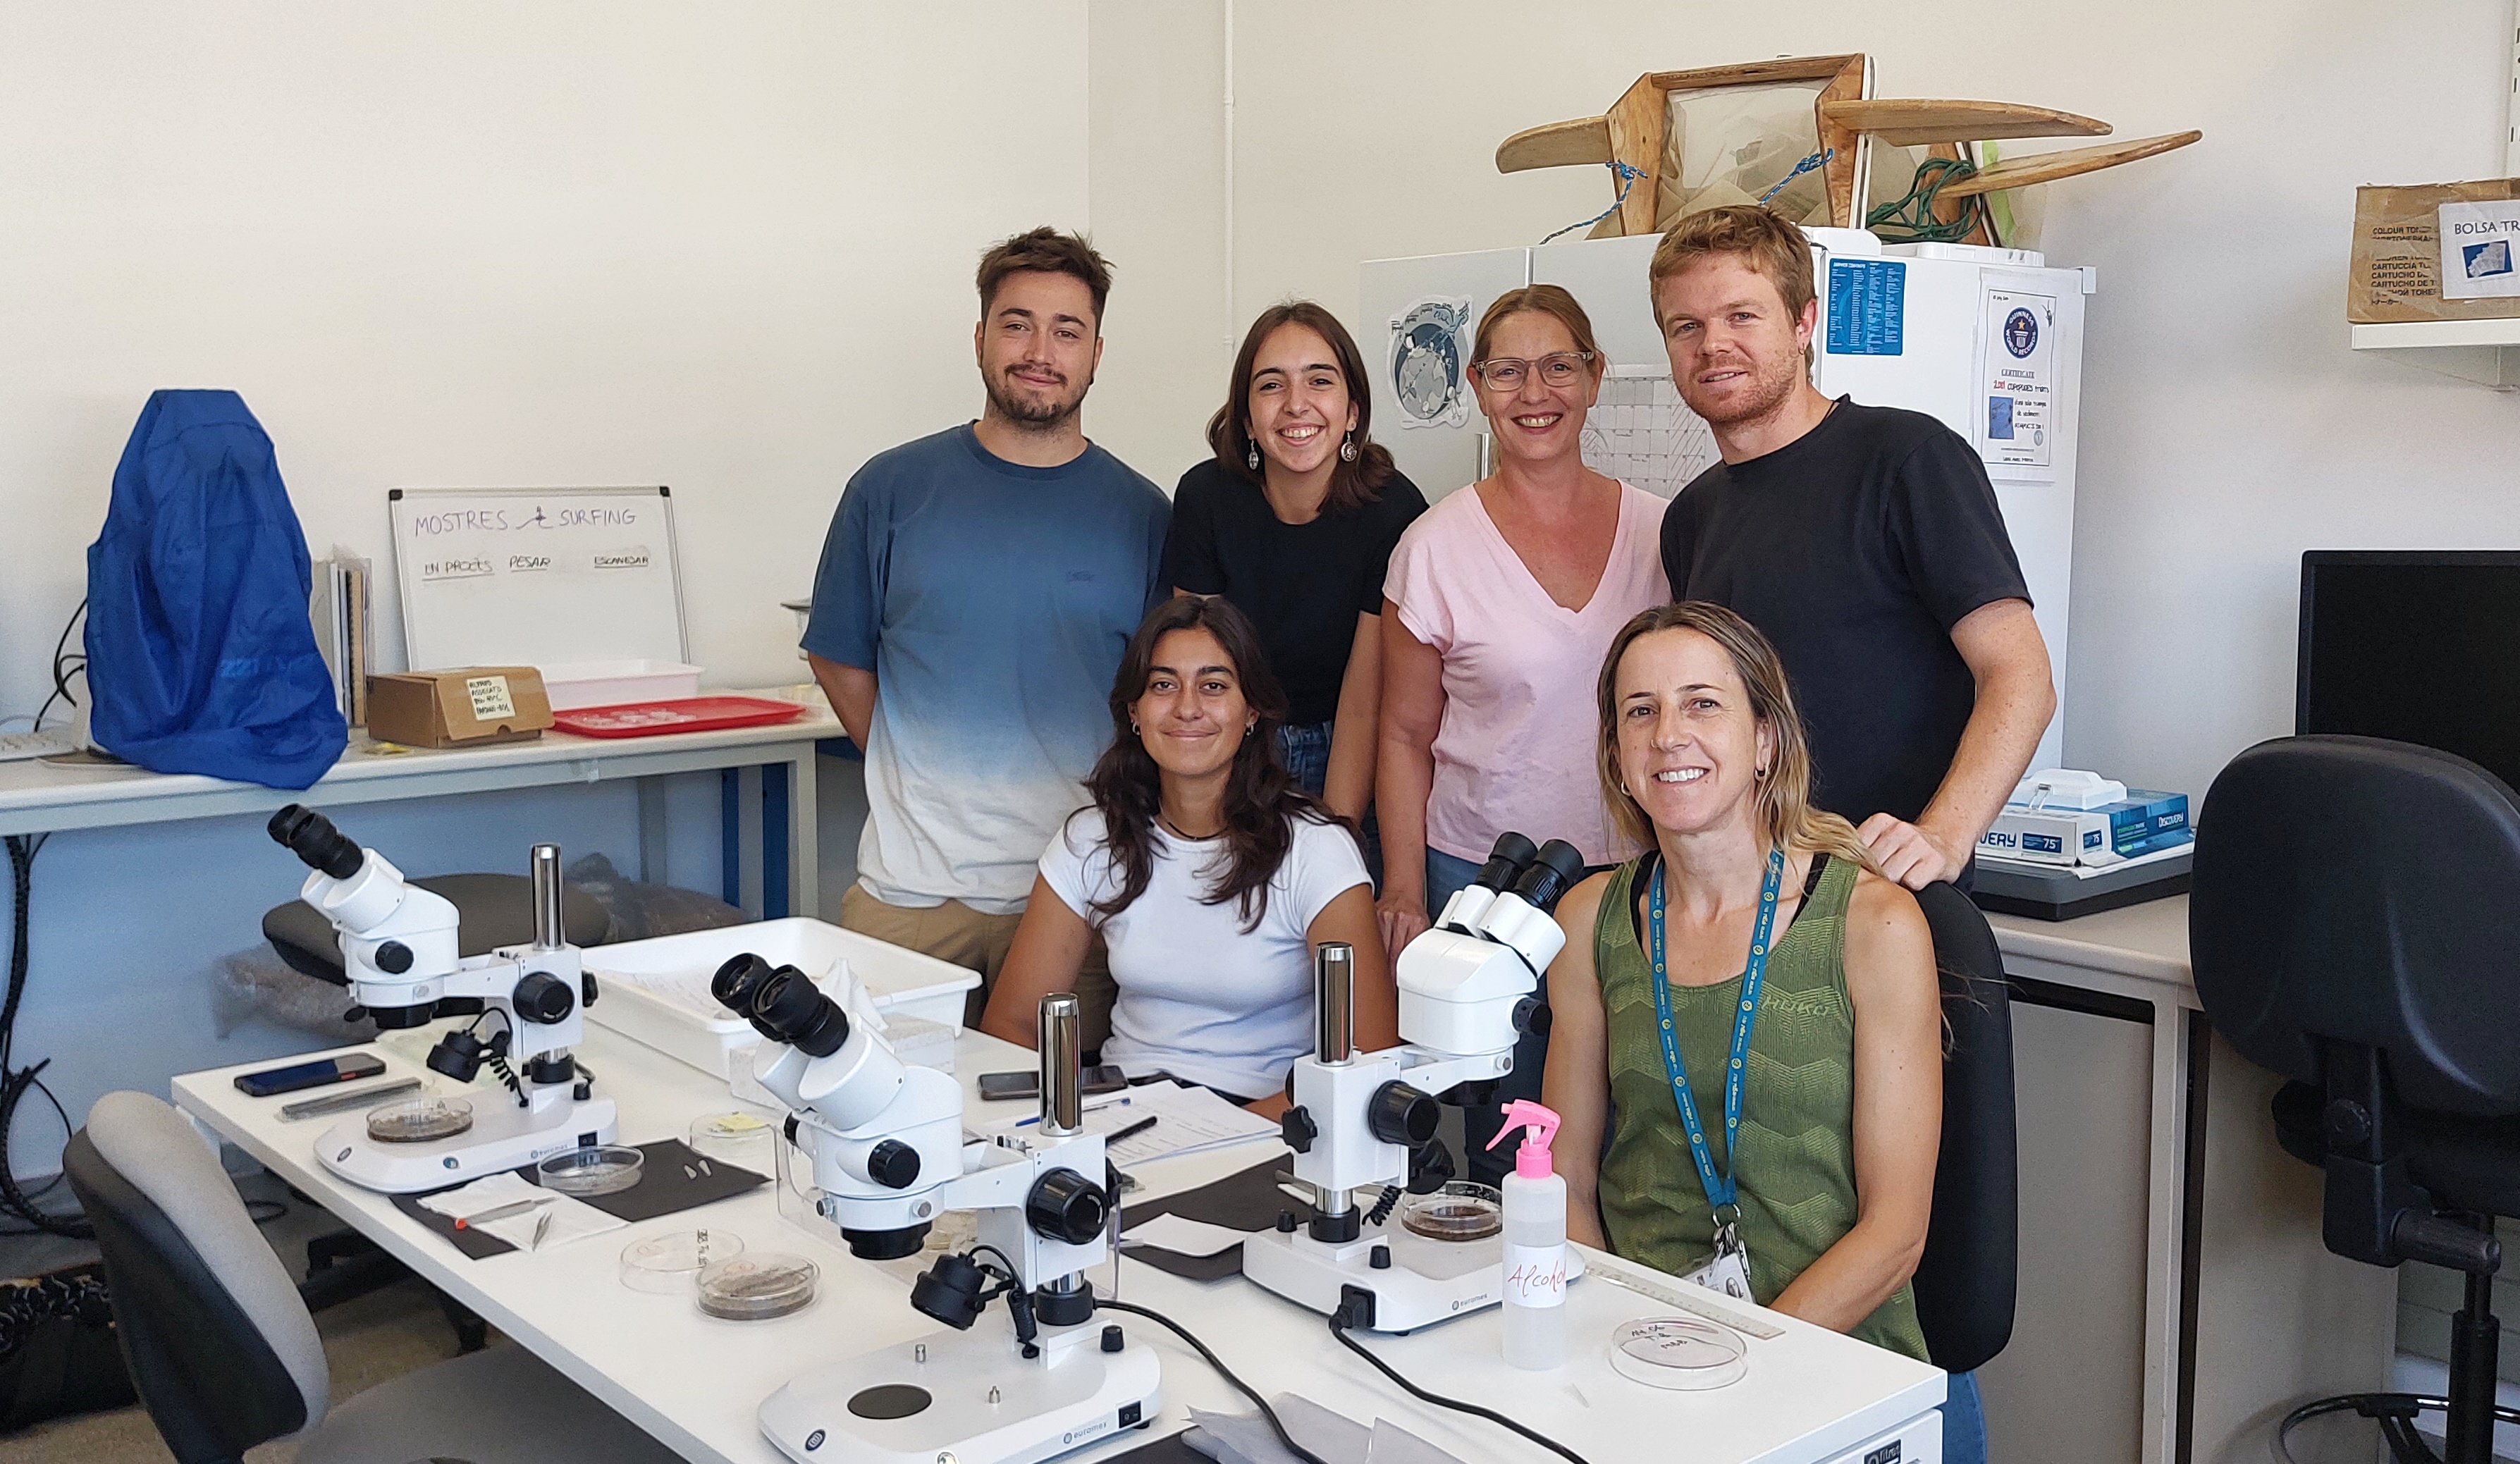 Researchers from the Marine Geosciences Research Group of the UB Faculty of Earth Sciences Oriol Uviedo, Arantxa Estrada, Montse Guart, Liam de Haan (standing) and Carla Martínez and Anna Sanchez-Vidal (seated).